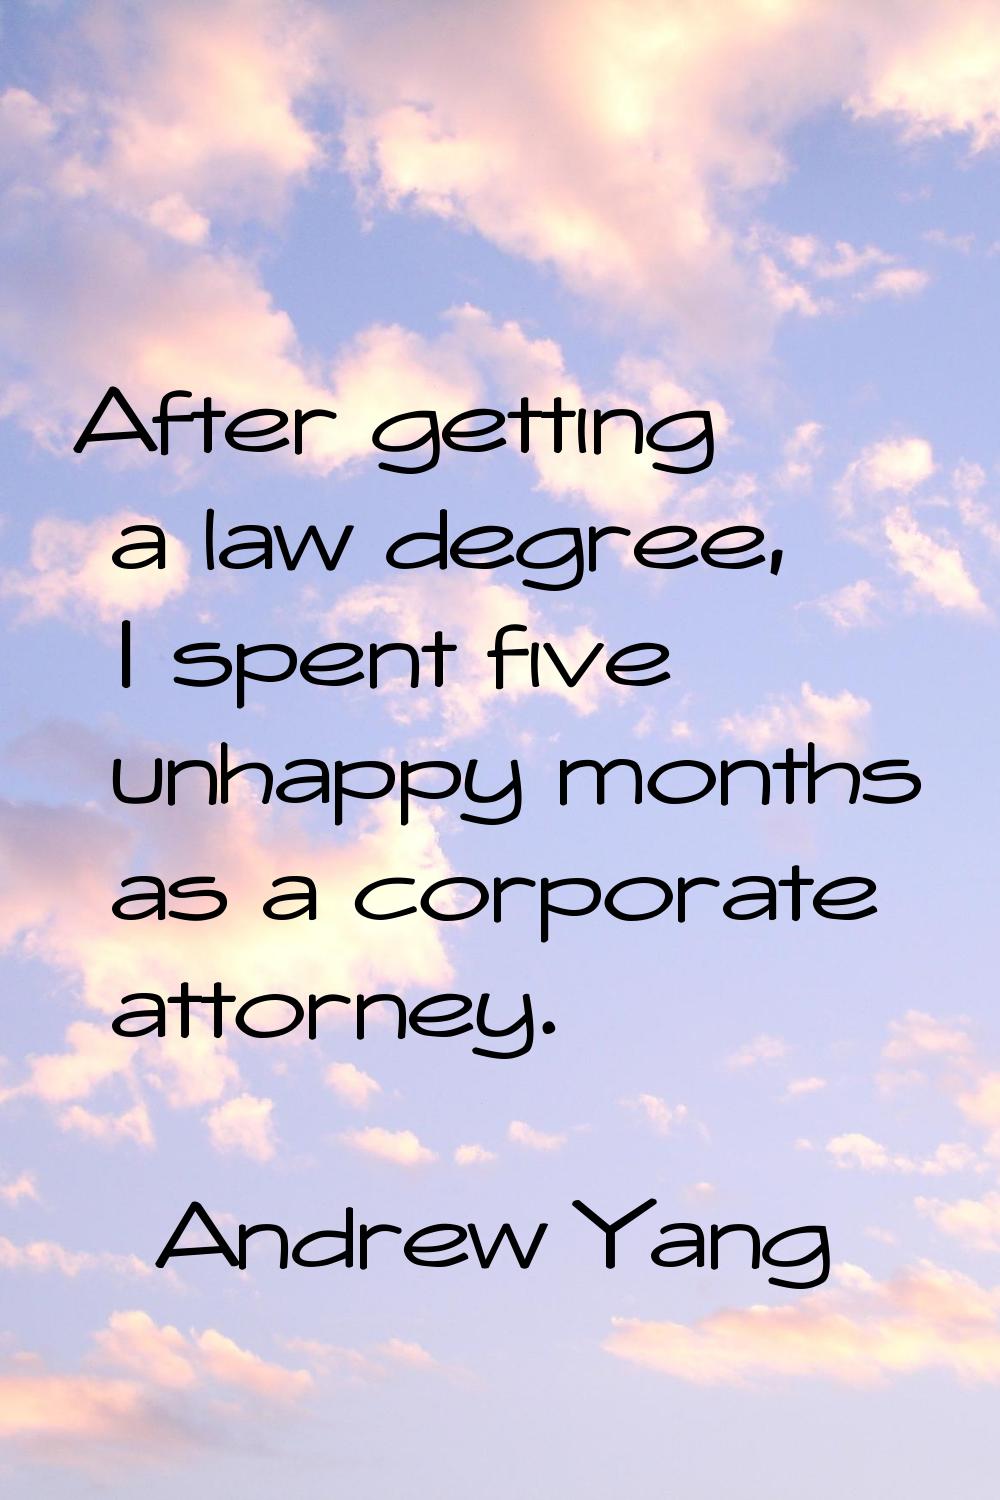 After getting a law degree, I spent five unhappy months as a corporate attorney.